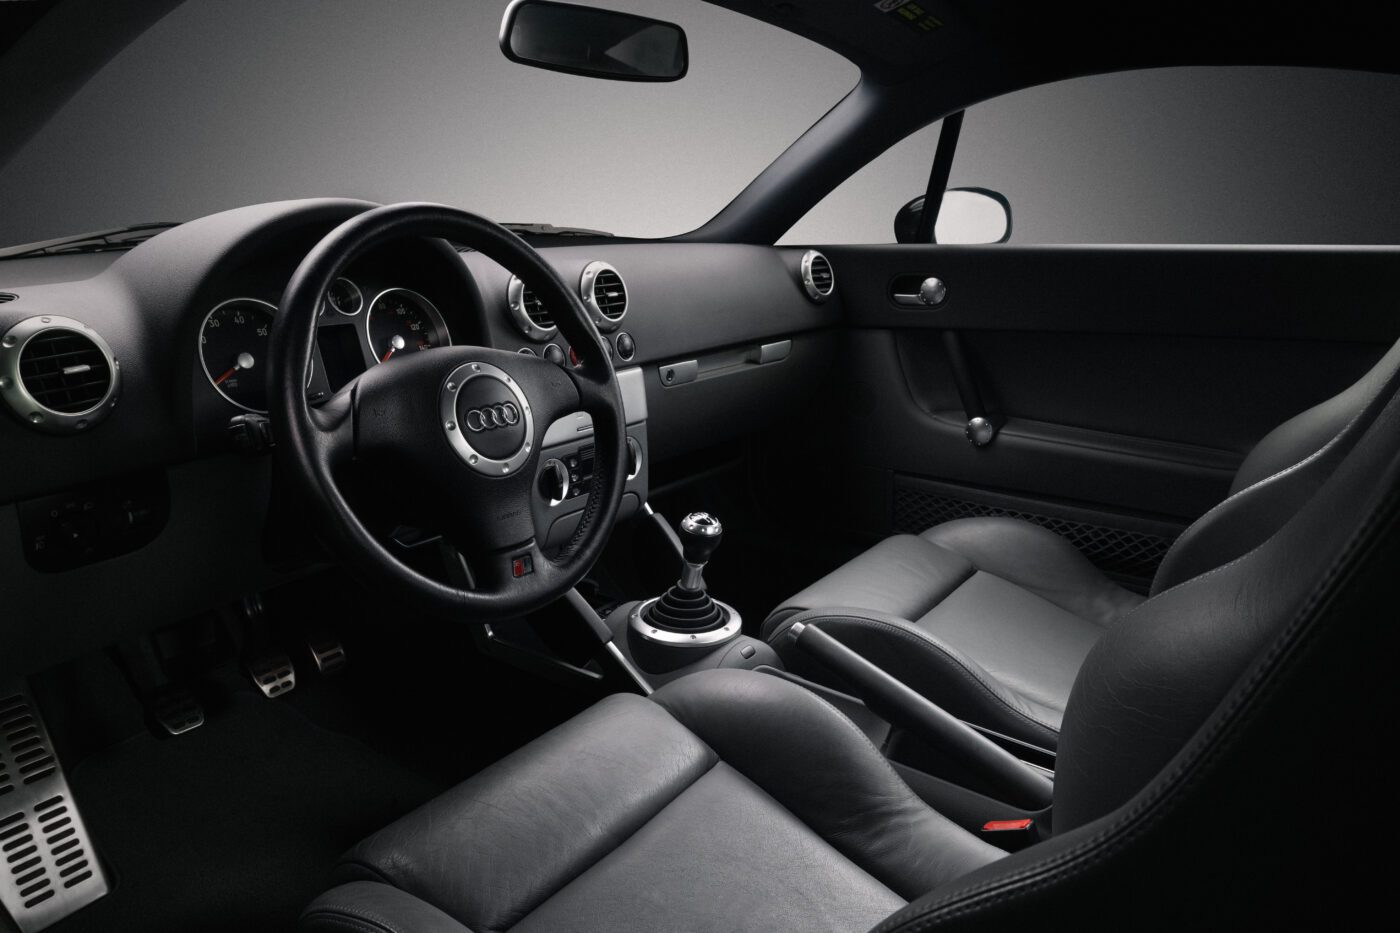 An image of a black leather interior shot in a studio.